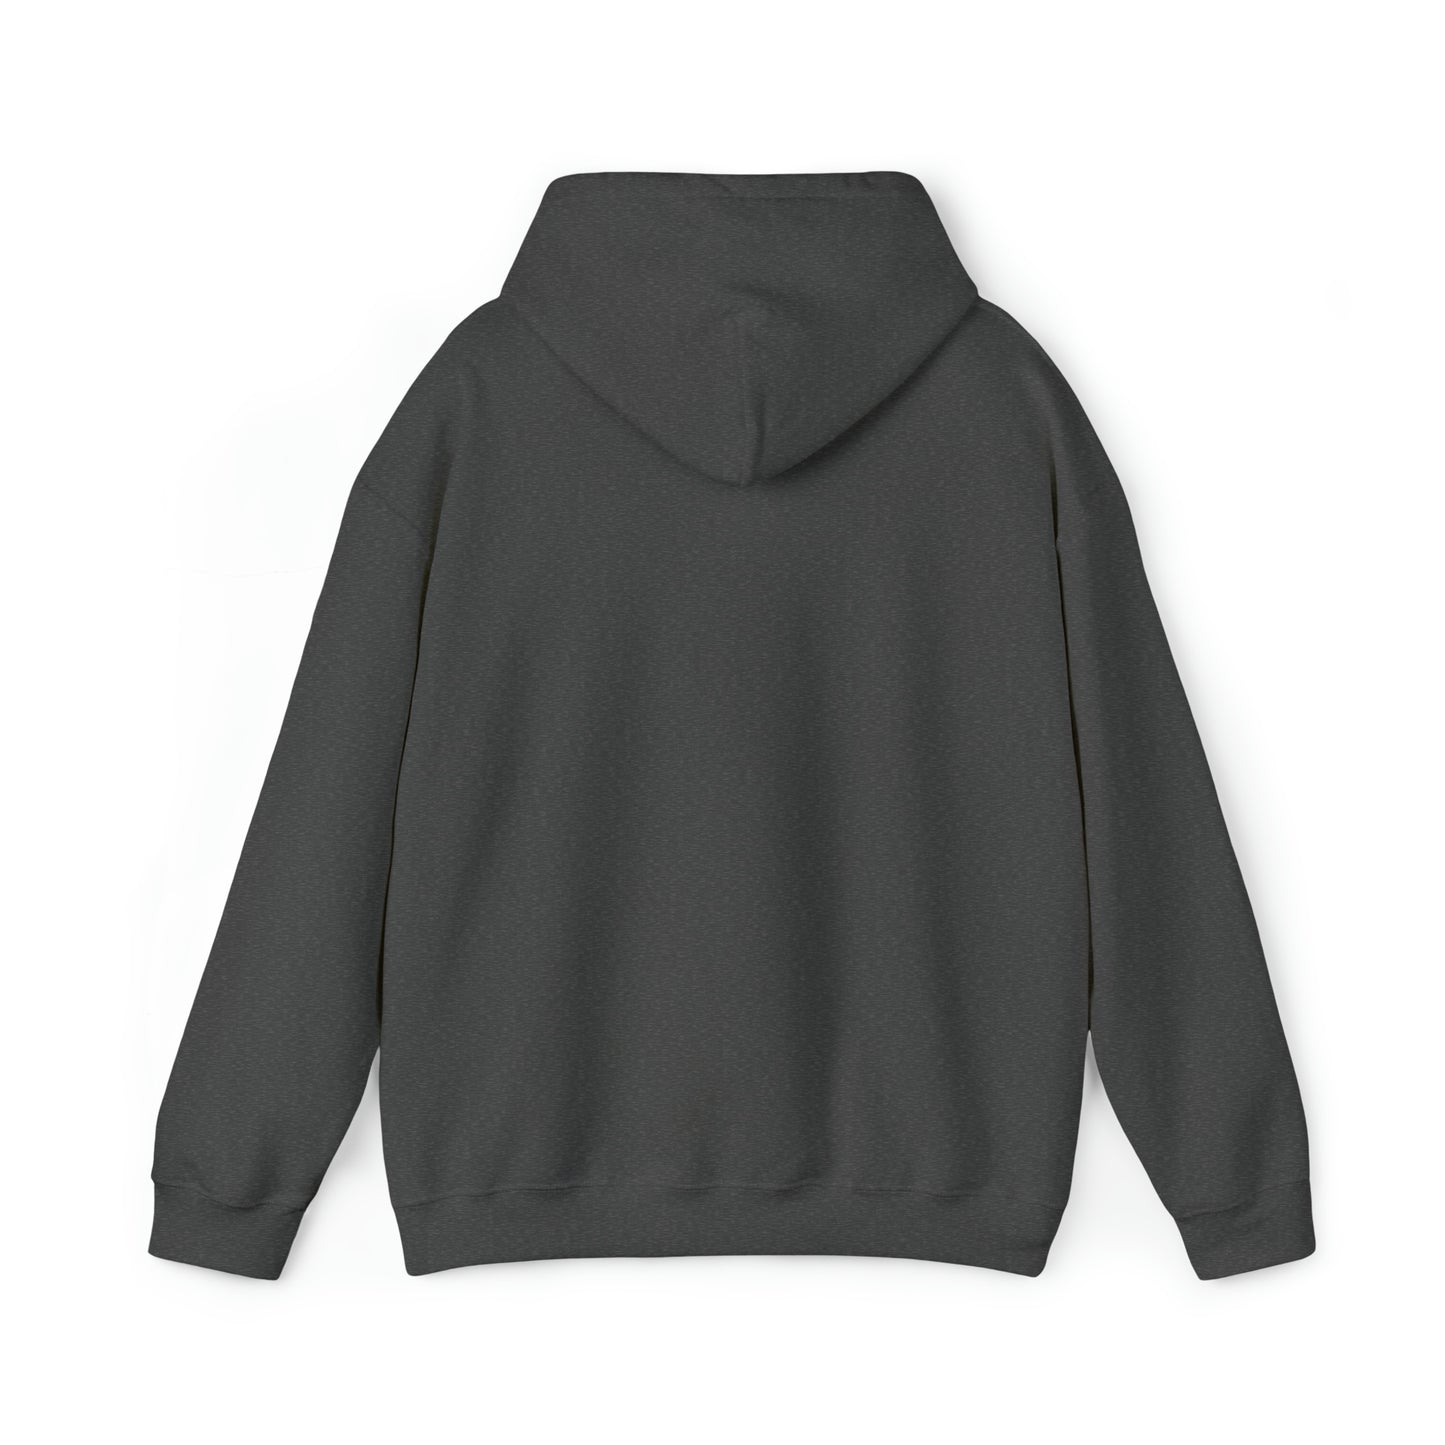 A plain dark gray Unisex Heavy Blend™ Hooded Sweatshirt with a hood displayed from the back, laid flat against a white background. The sleeves appear neatly arranged and the overall look is simple and casual, evoking the understated style of Toronto's Cabbagetown neighborhood.